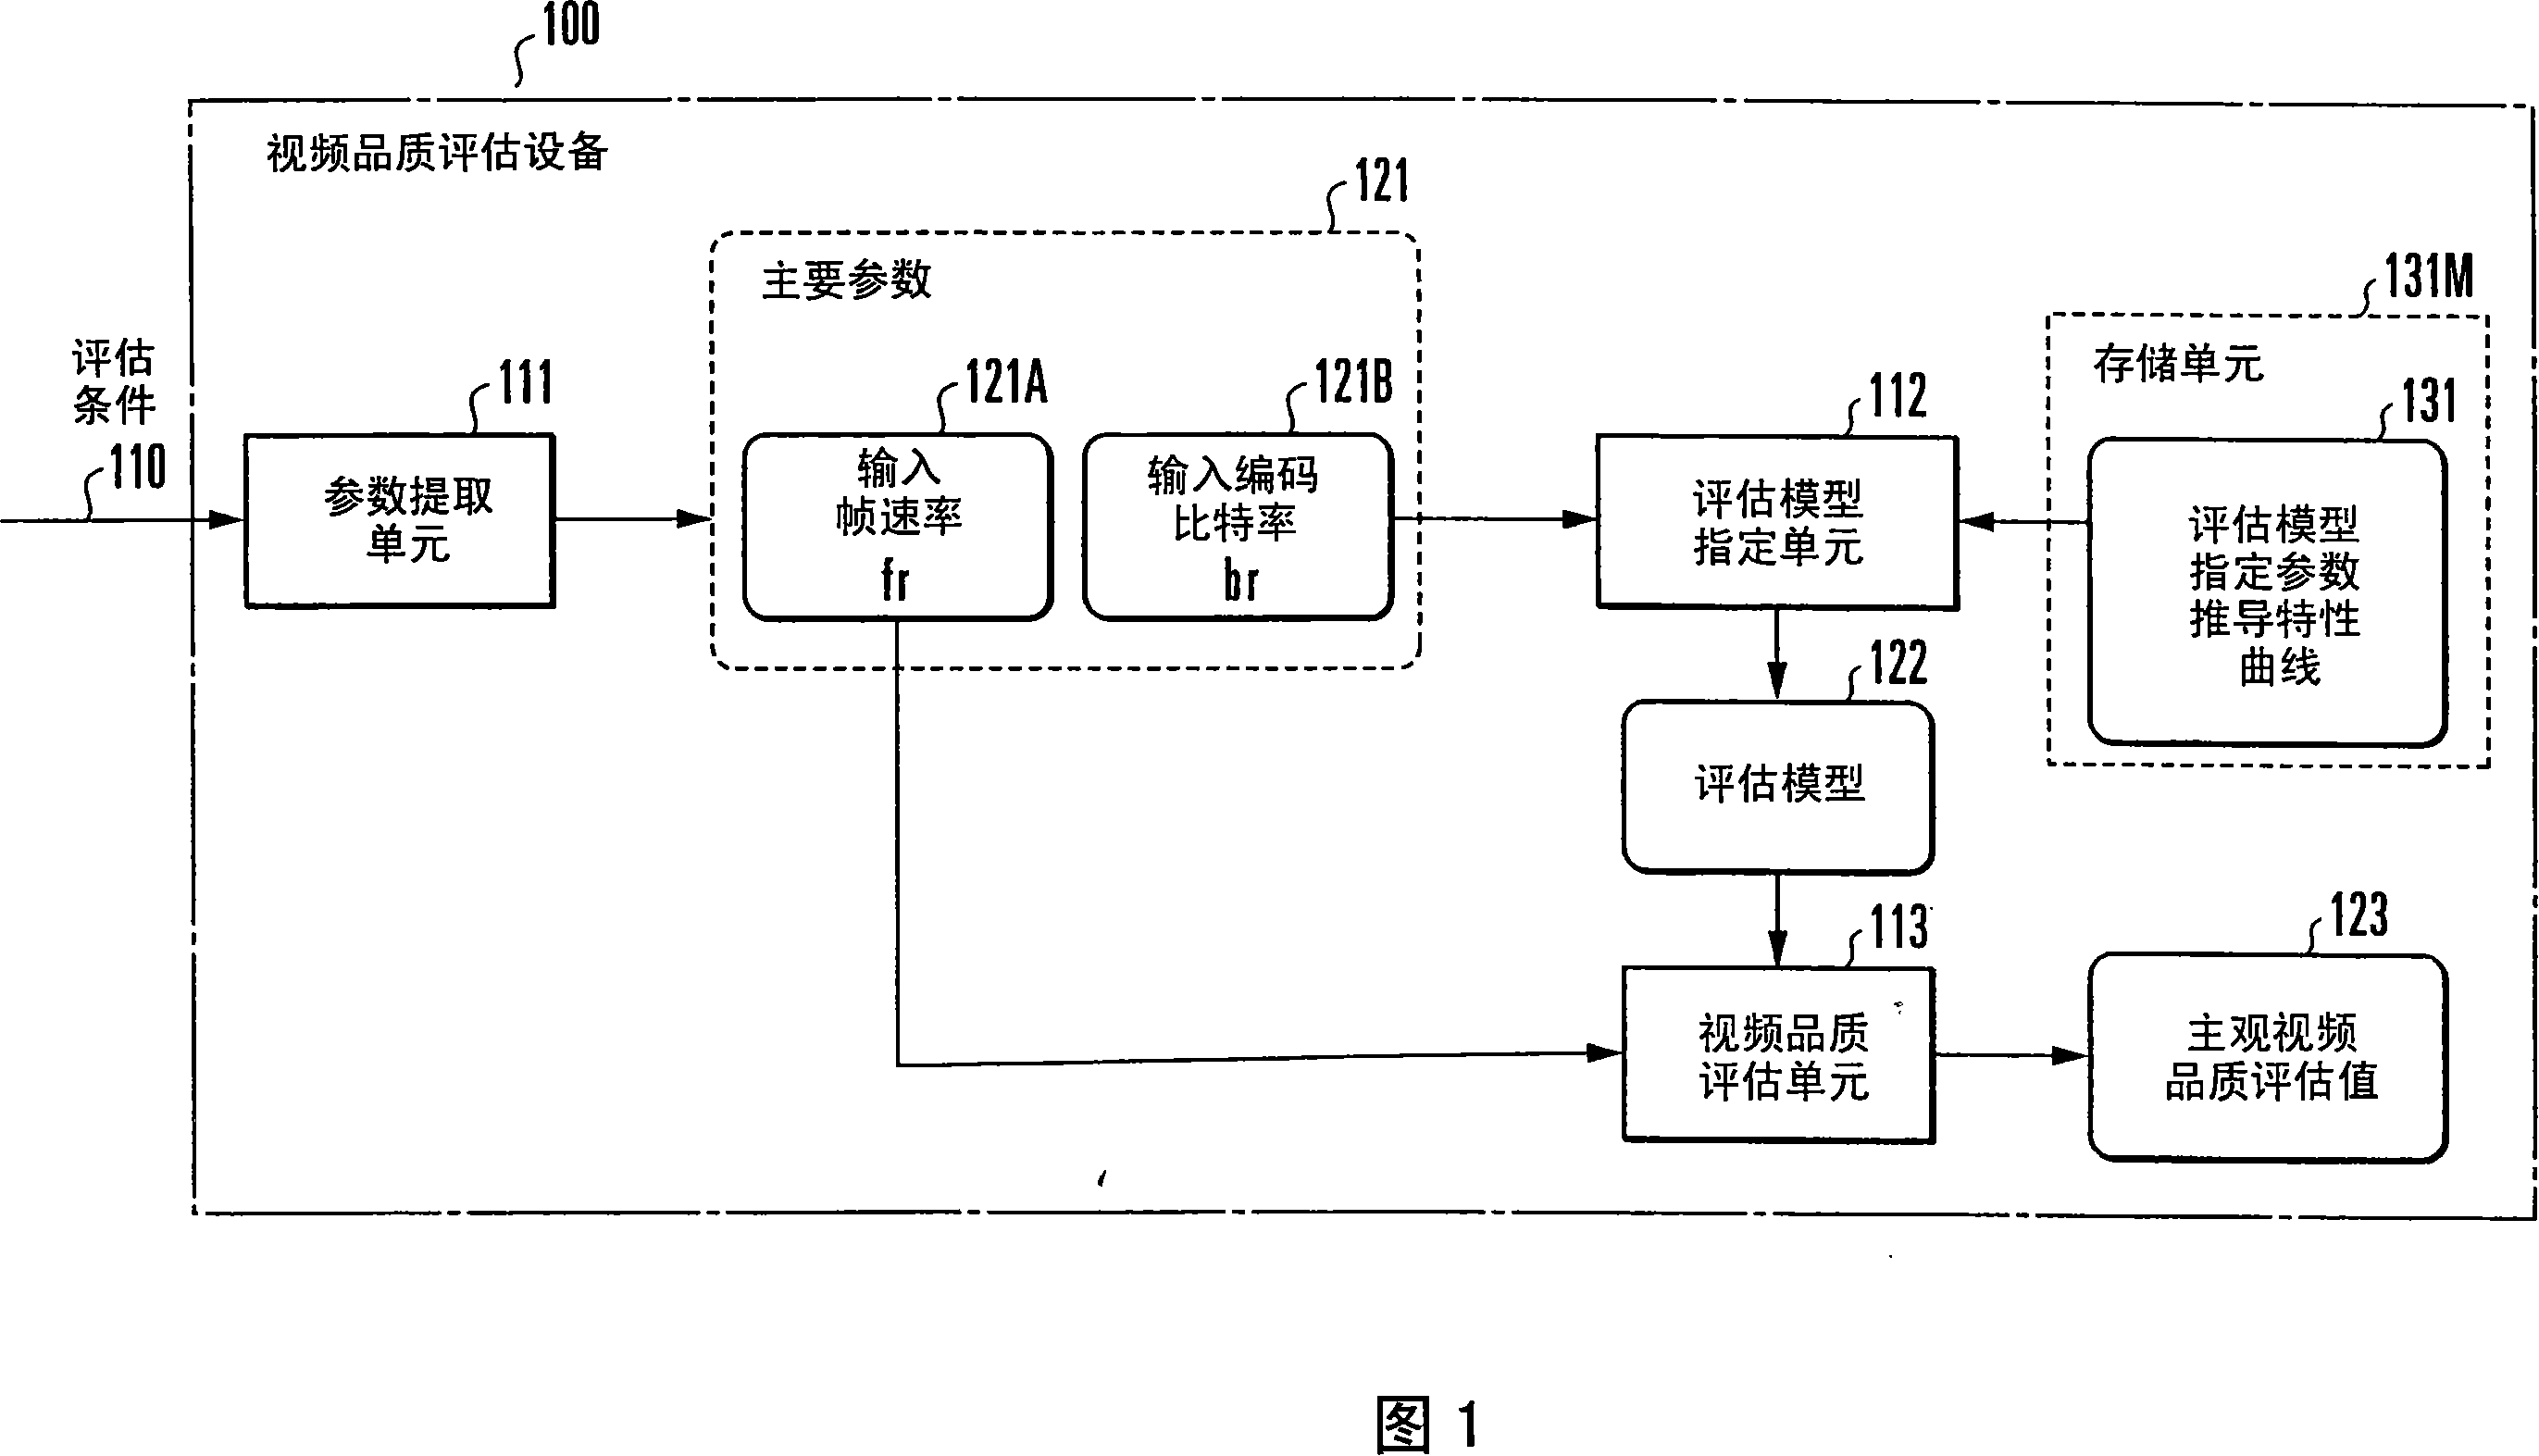 Video quality estimating device, method, and program